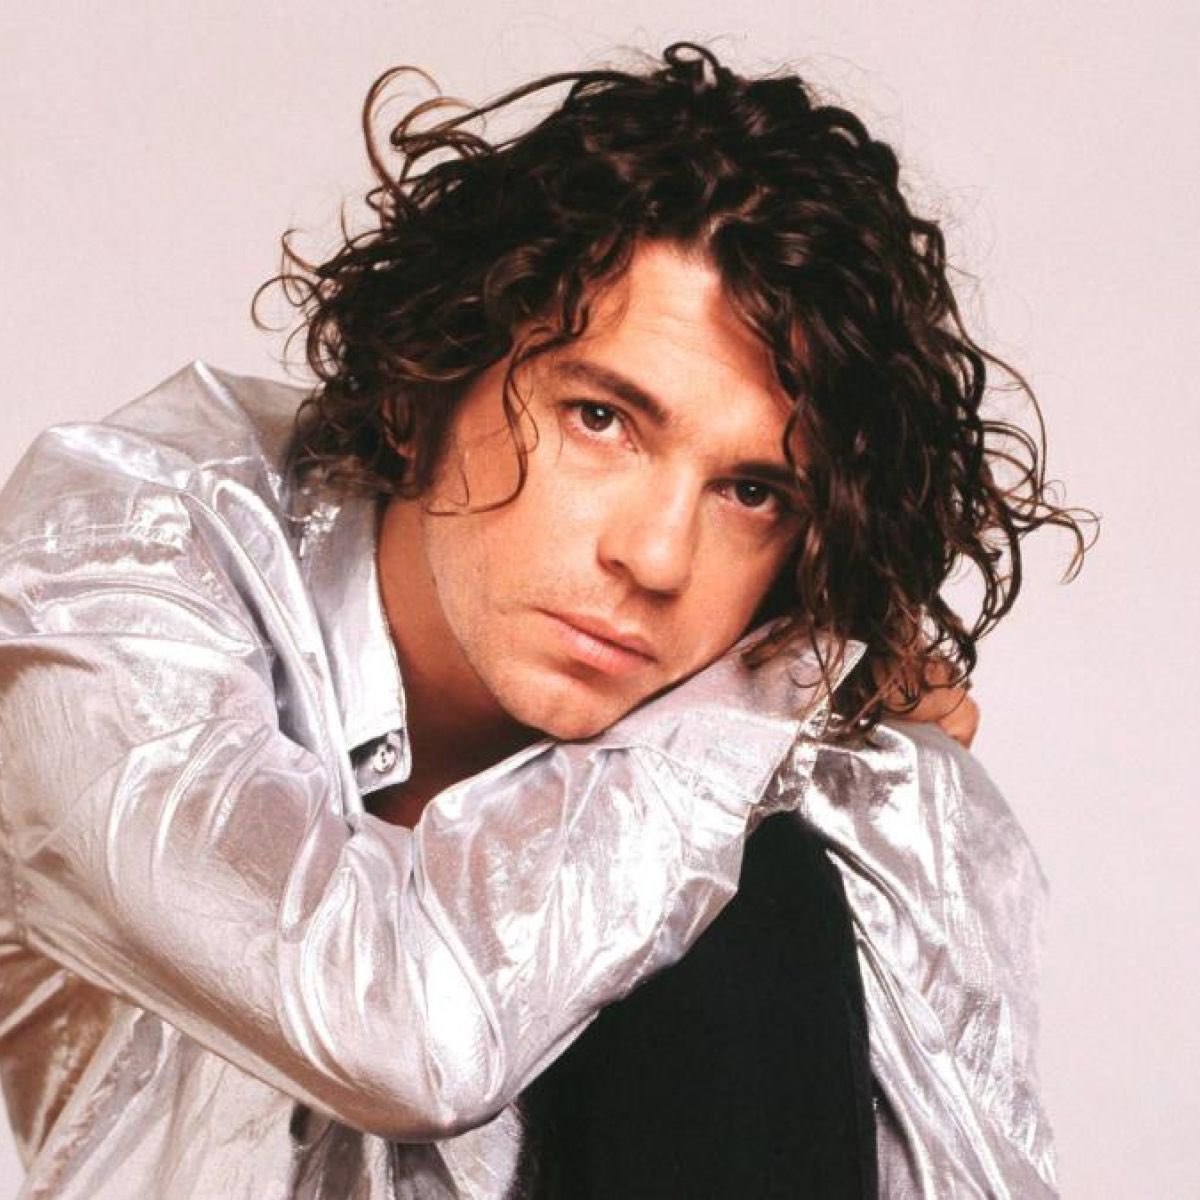 Remembering MICHAEL HUTCHENCE, who we lost 24 years ago today.

The loved one. ❤️🙏
youtu.be/cLqTNz6IAig
#MichaelHutchence #INXS #MAXQ #newwave #alternativerock #funkrock #dancerock #HonouringMichaelHutchence #musiclegend @INXS